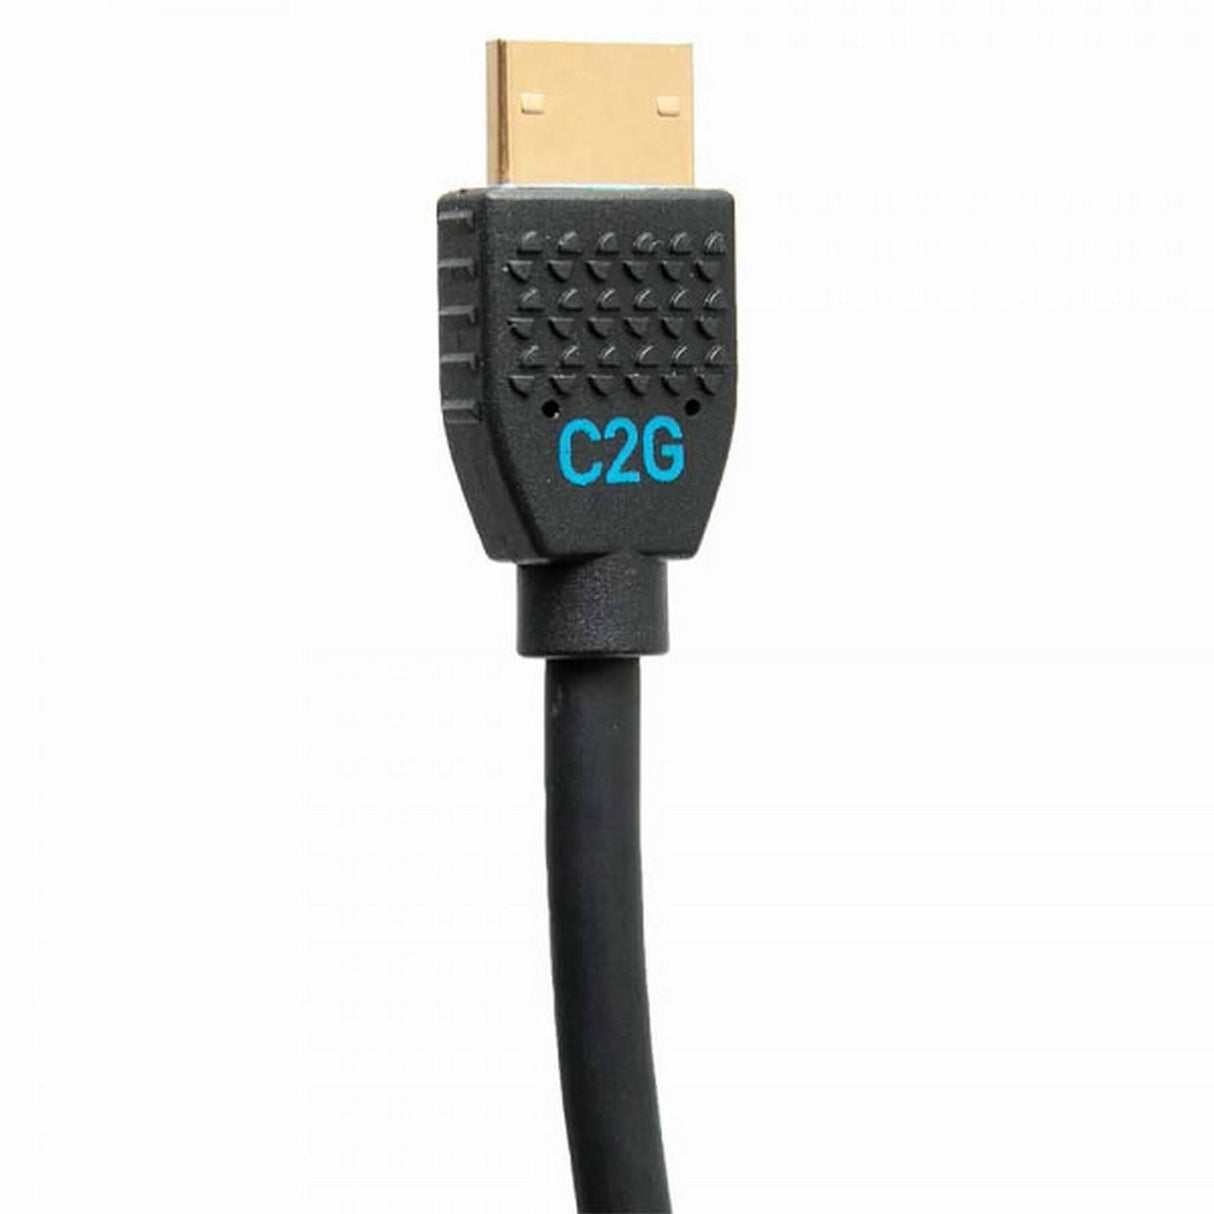 C2G Performance Series Ultra Flexible High Speed HDMI Cable, 4K 60Hz In-Wall, 10 Foot